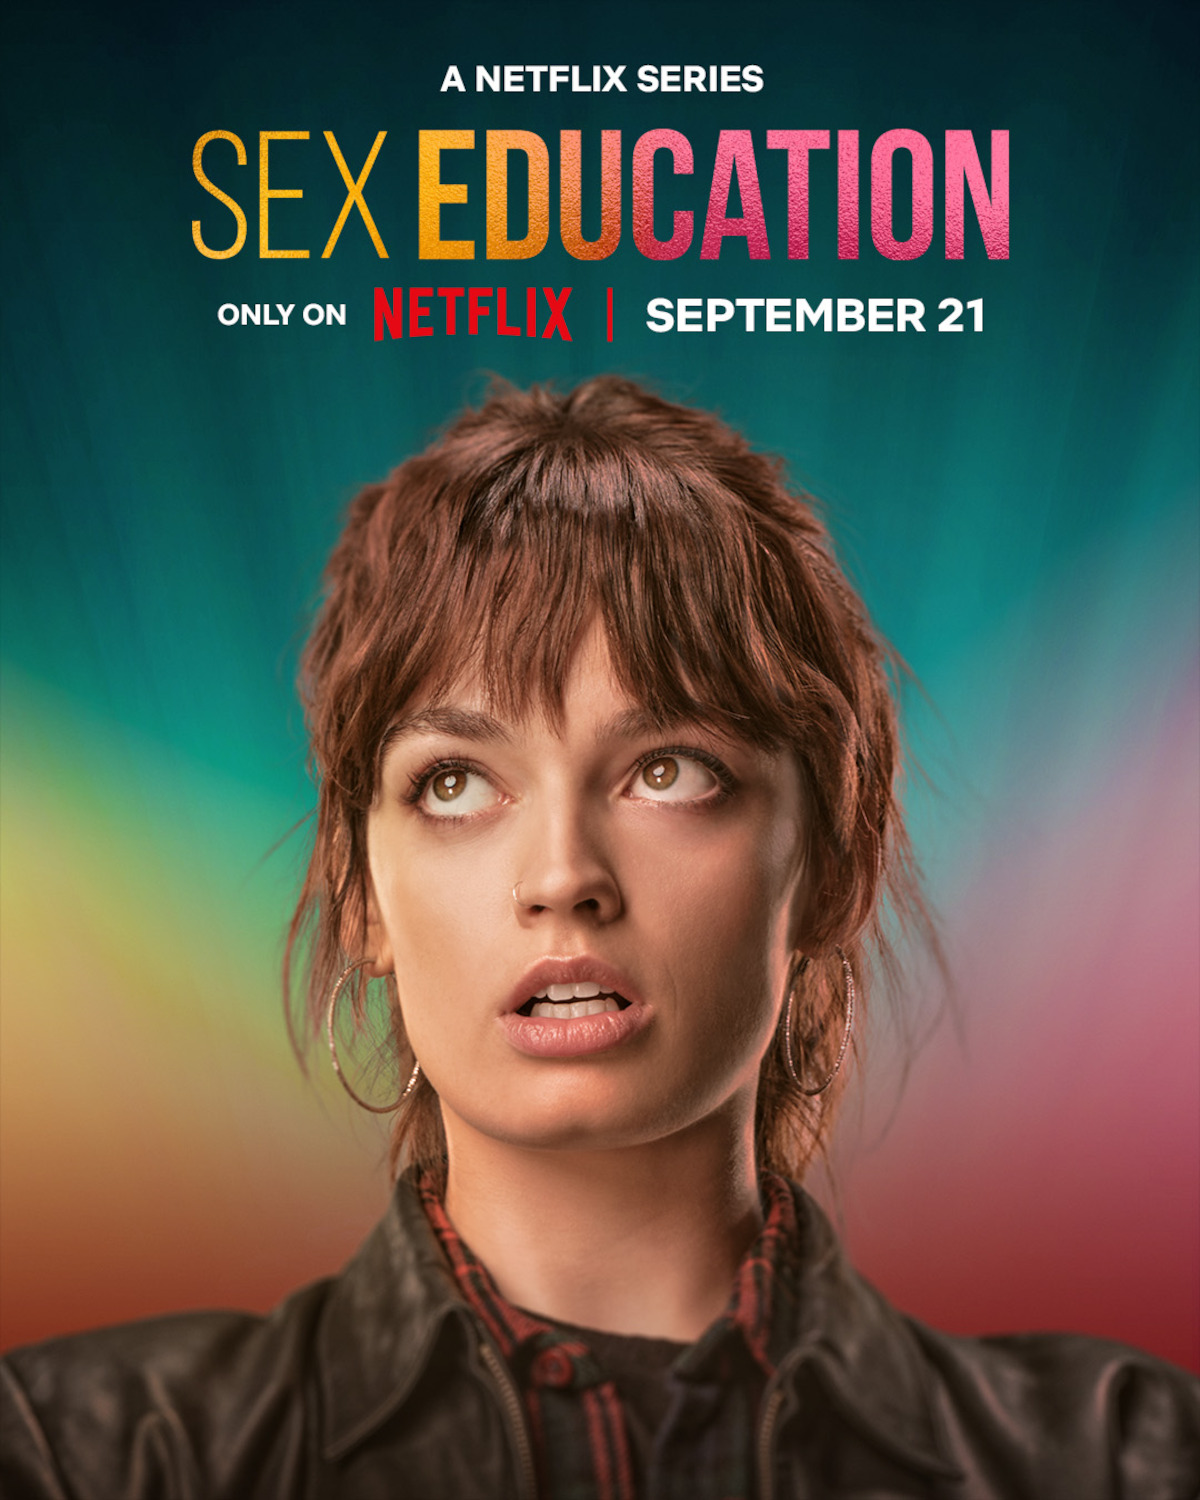 When Does Sex Education Season 4 Come Out The Final Season Of The Series Is Coming Soon